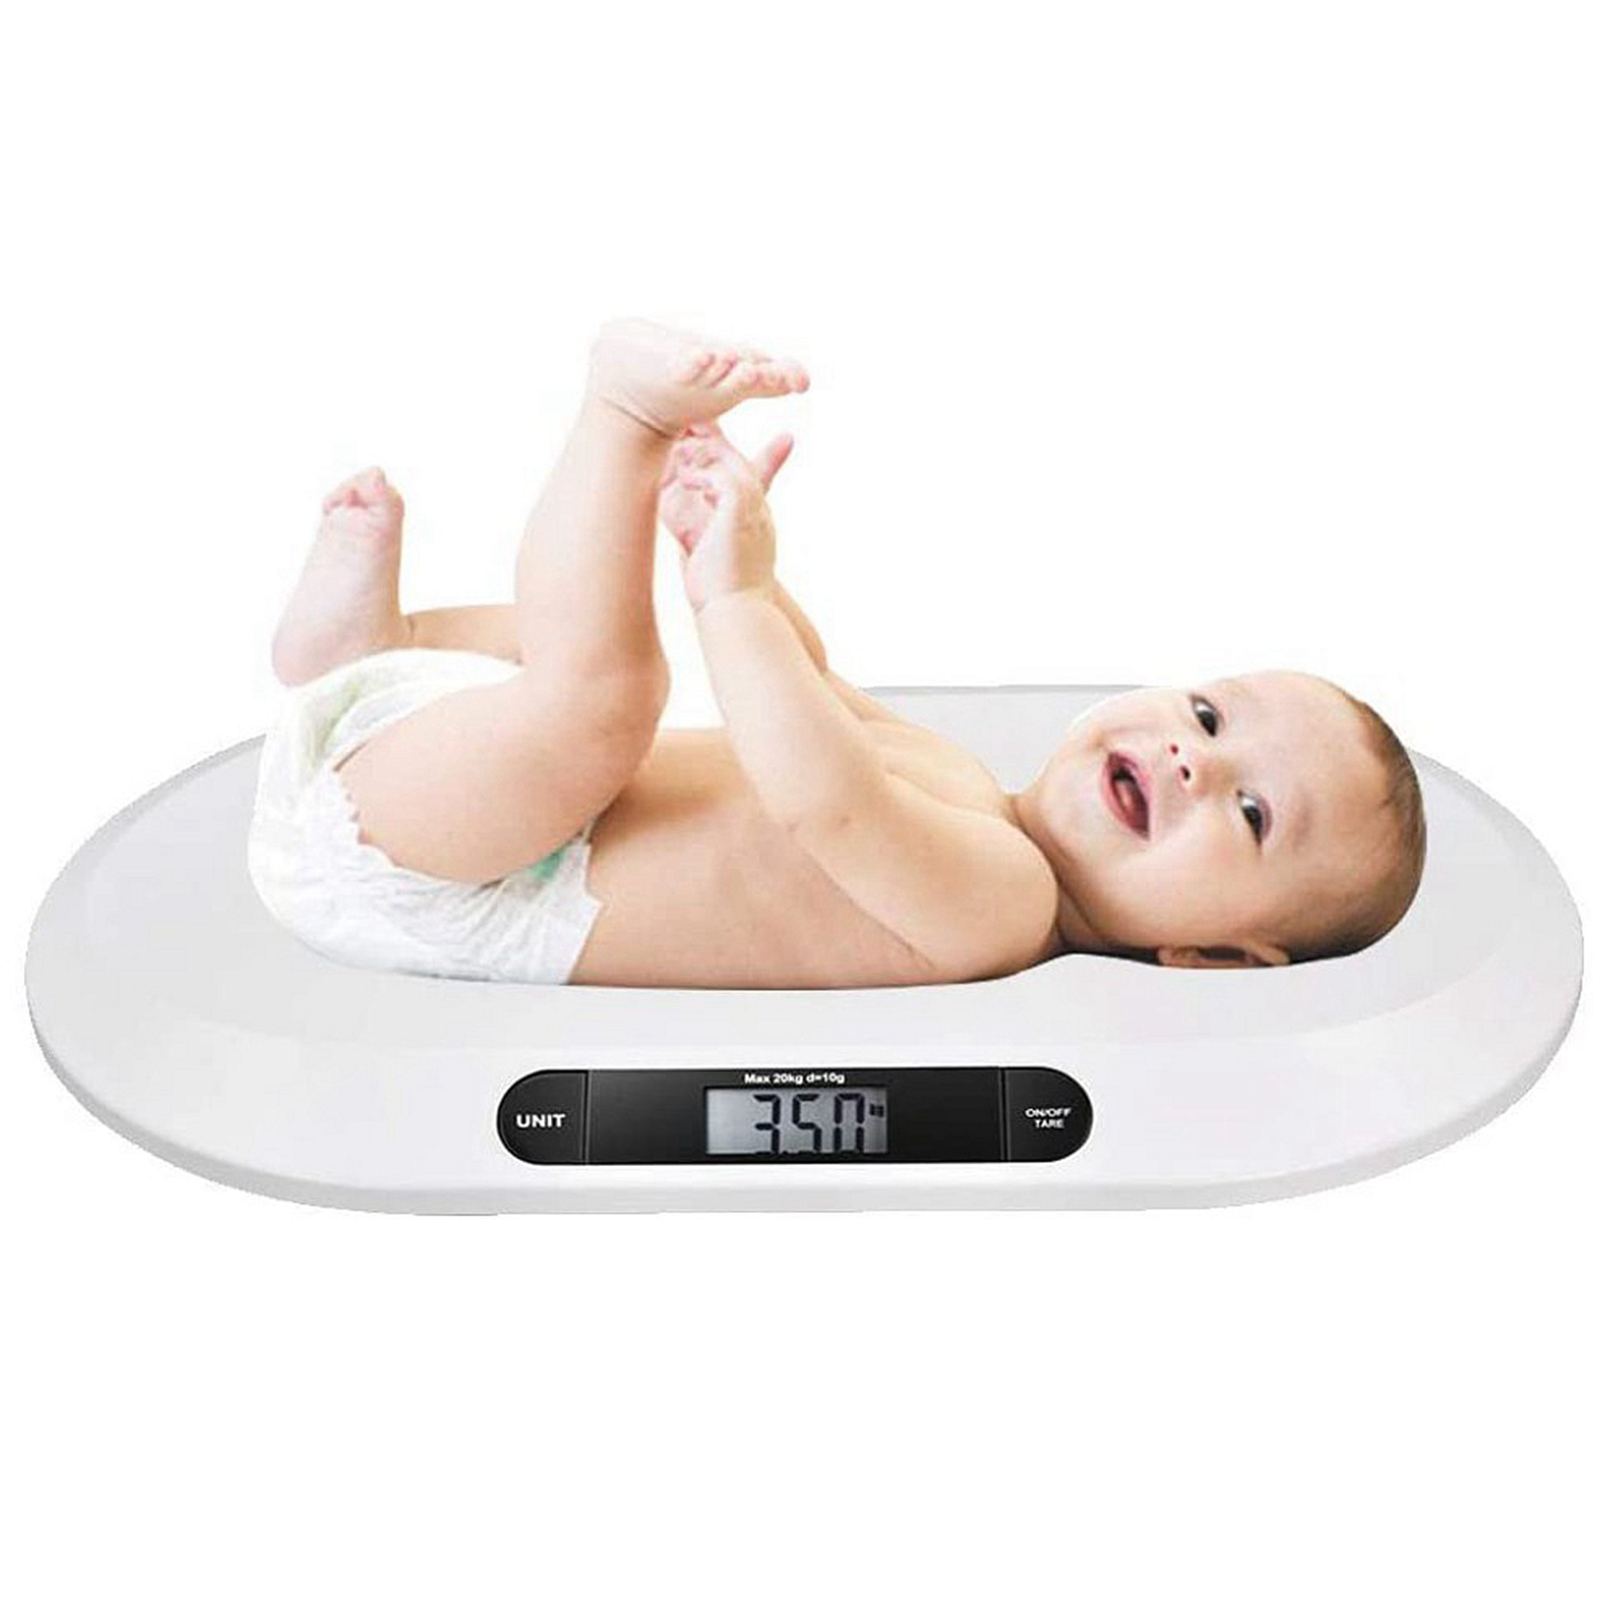 Digital Electronic Weighing Scale Newborn Baby Infant Pets Bathrooms 20KGS/44LBS